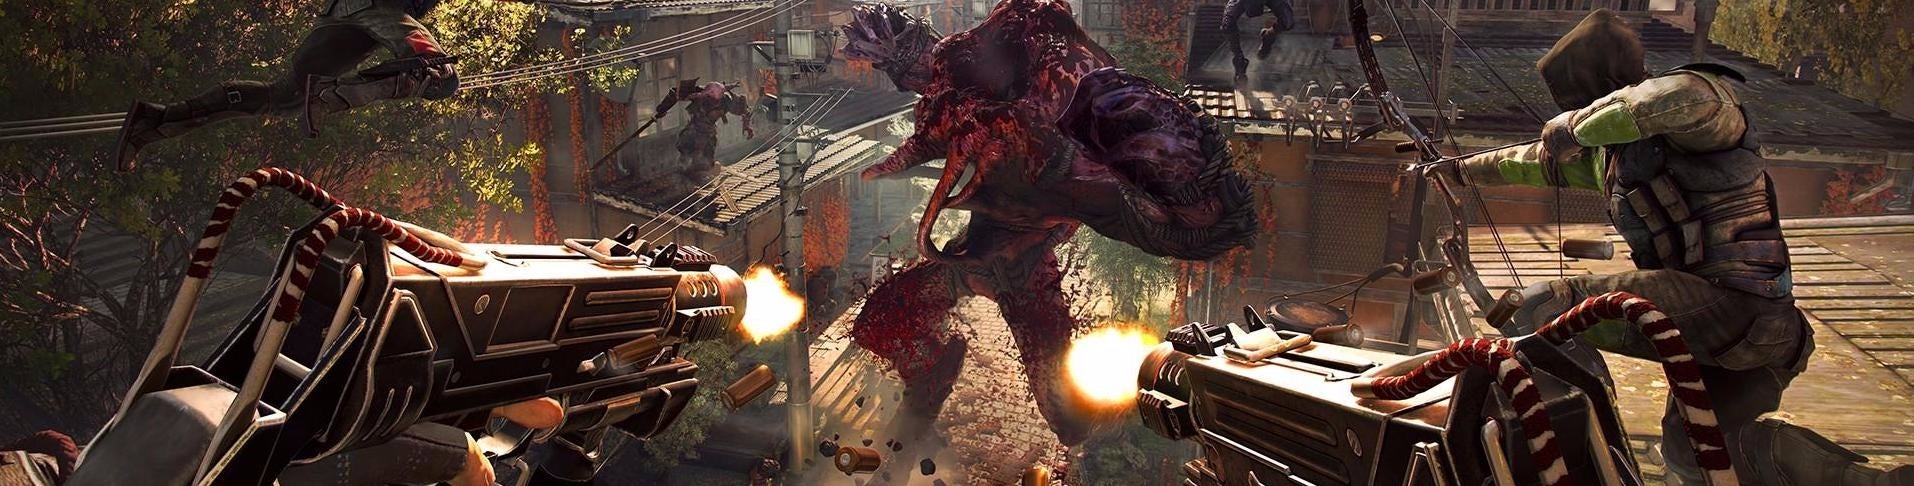 Image for Shadow Warrior 2 is fine on consoles but lacks key features